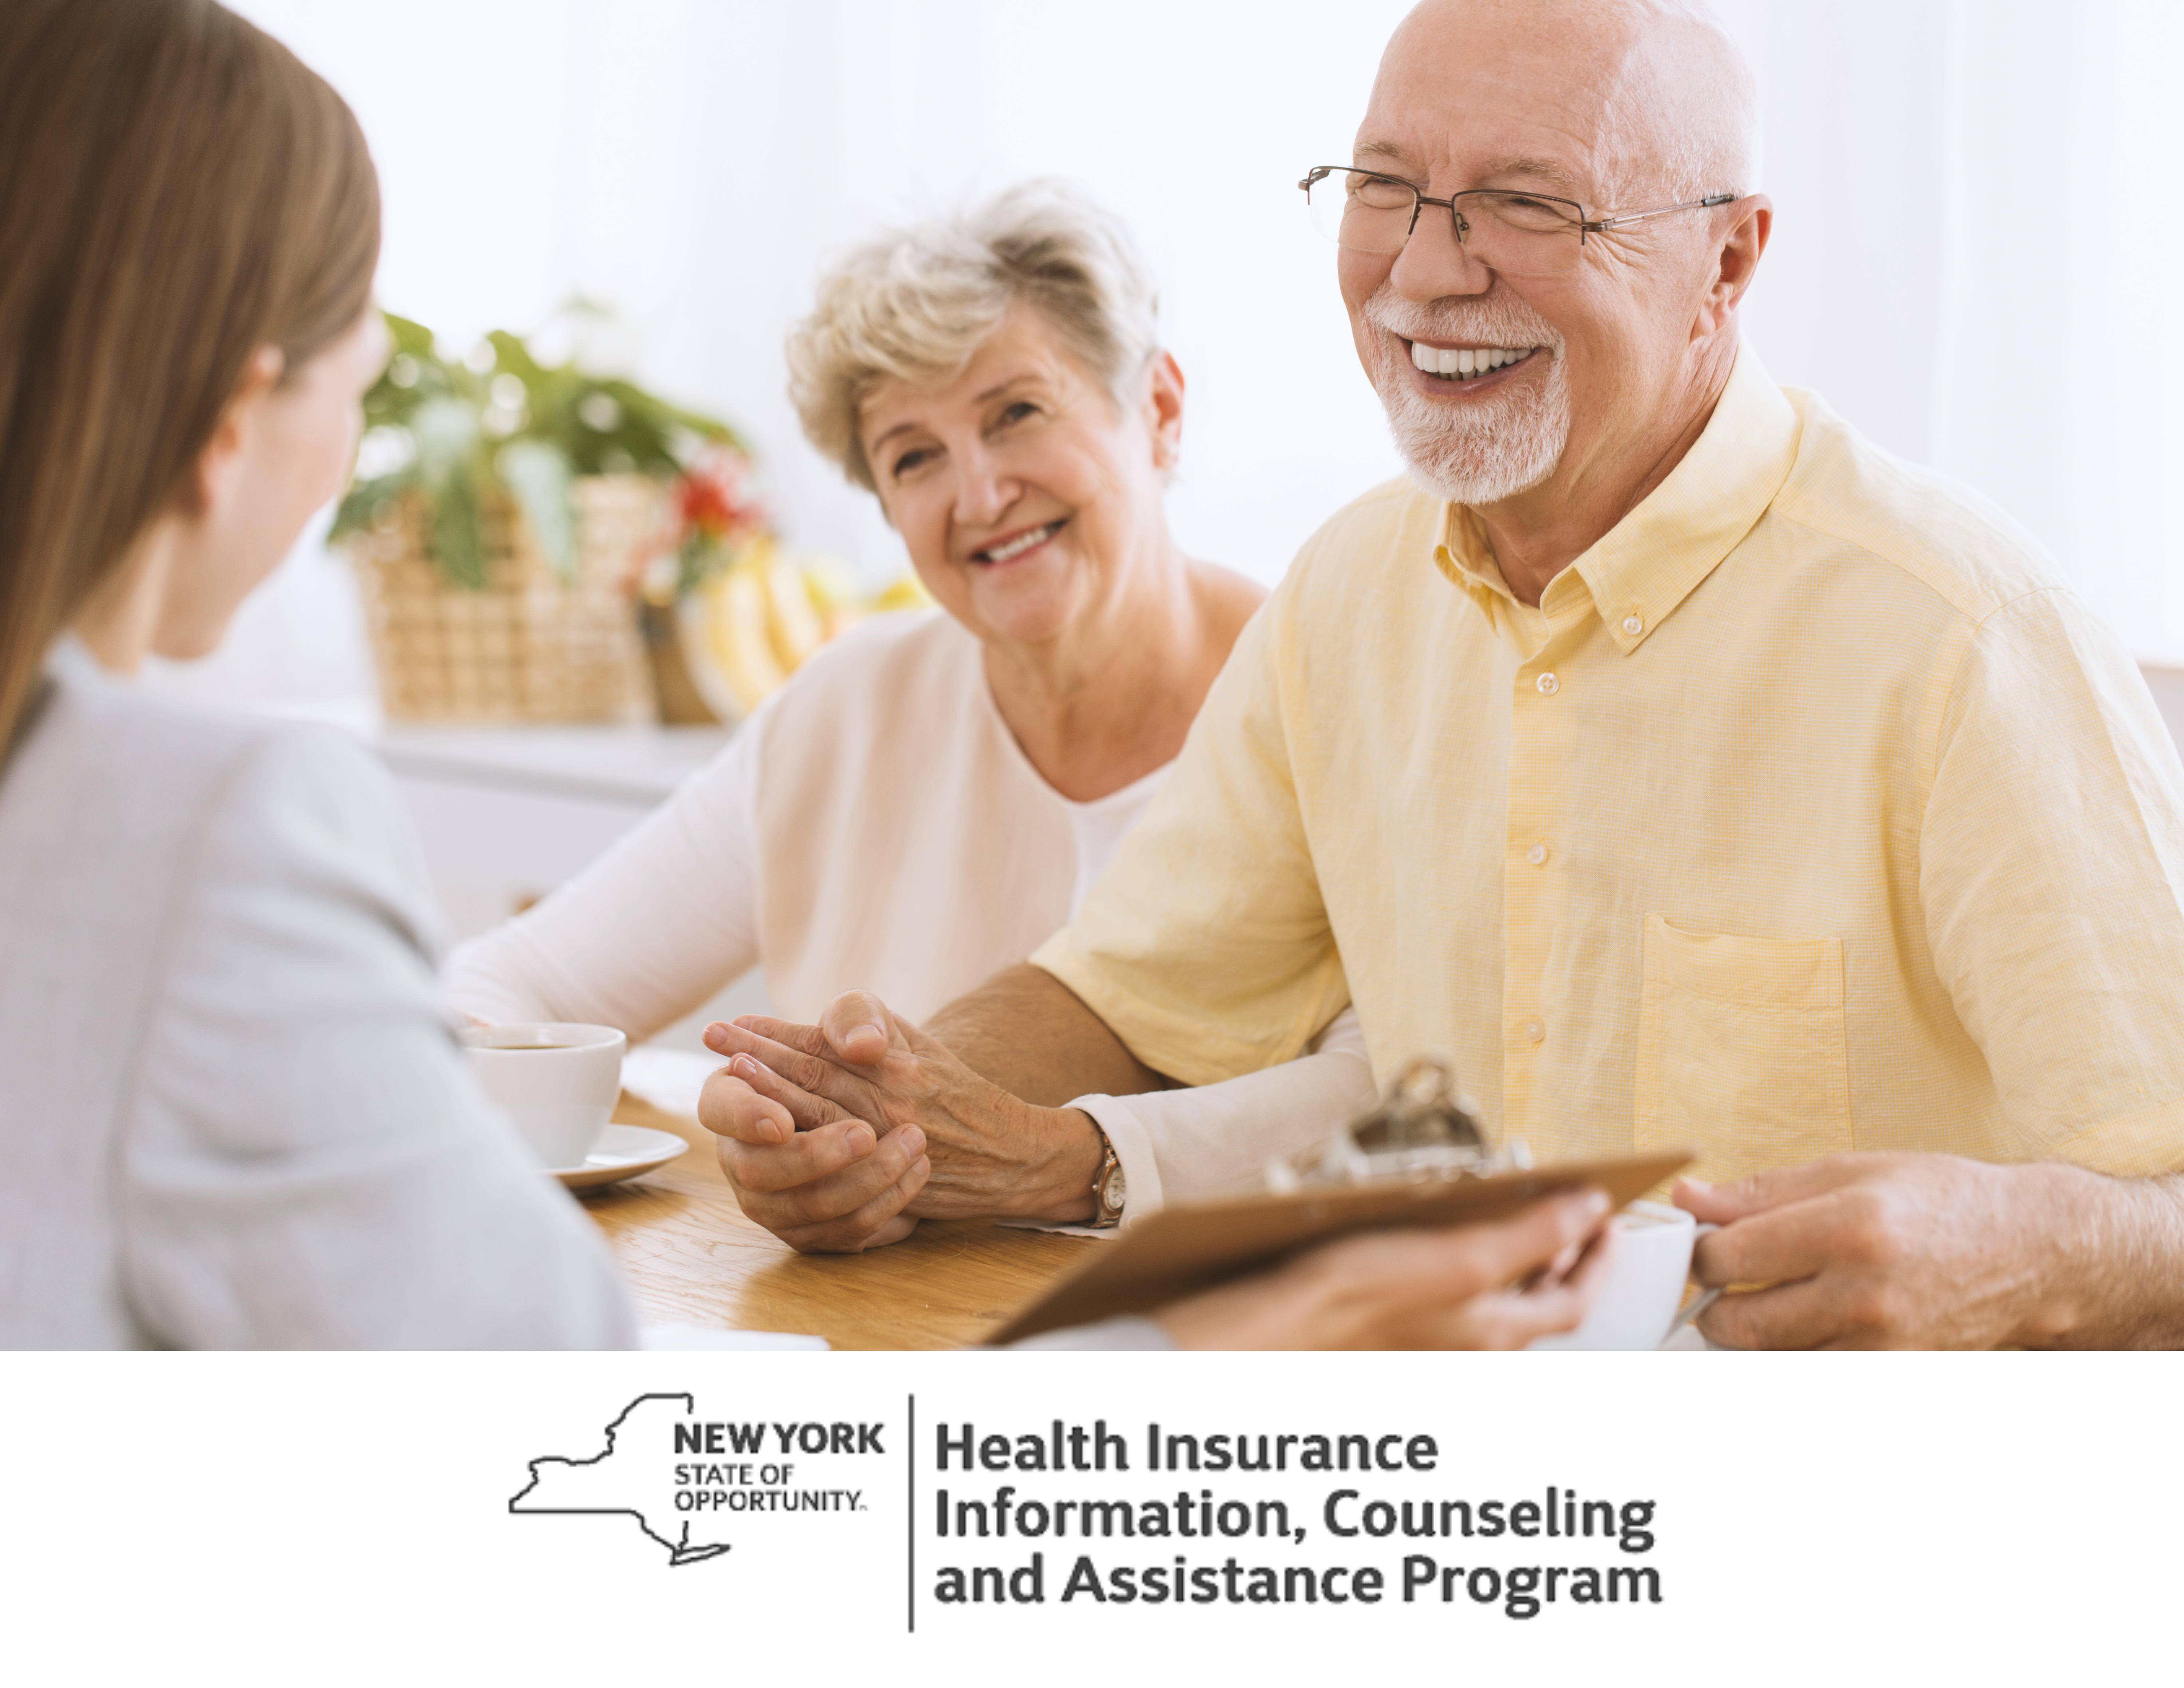 [A picture of two seniors discussing health insurance with a younger woman holding a clip board] [logo] Health Insurance Information, Counseling and Assistance Program